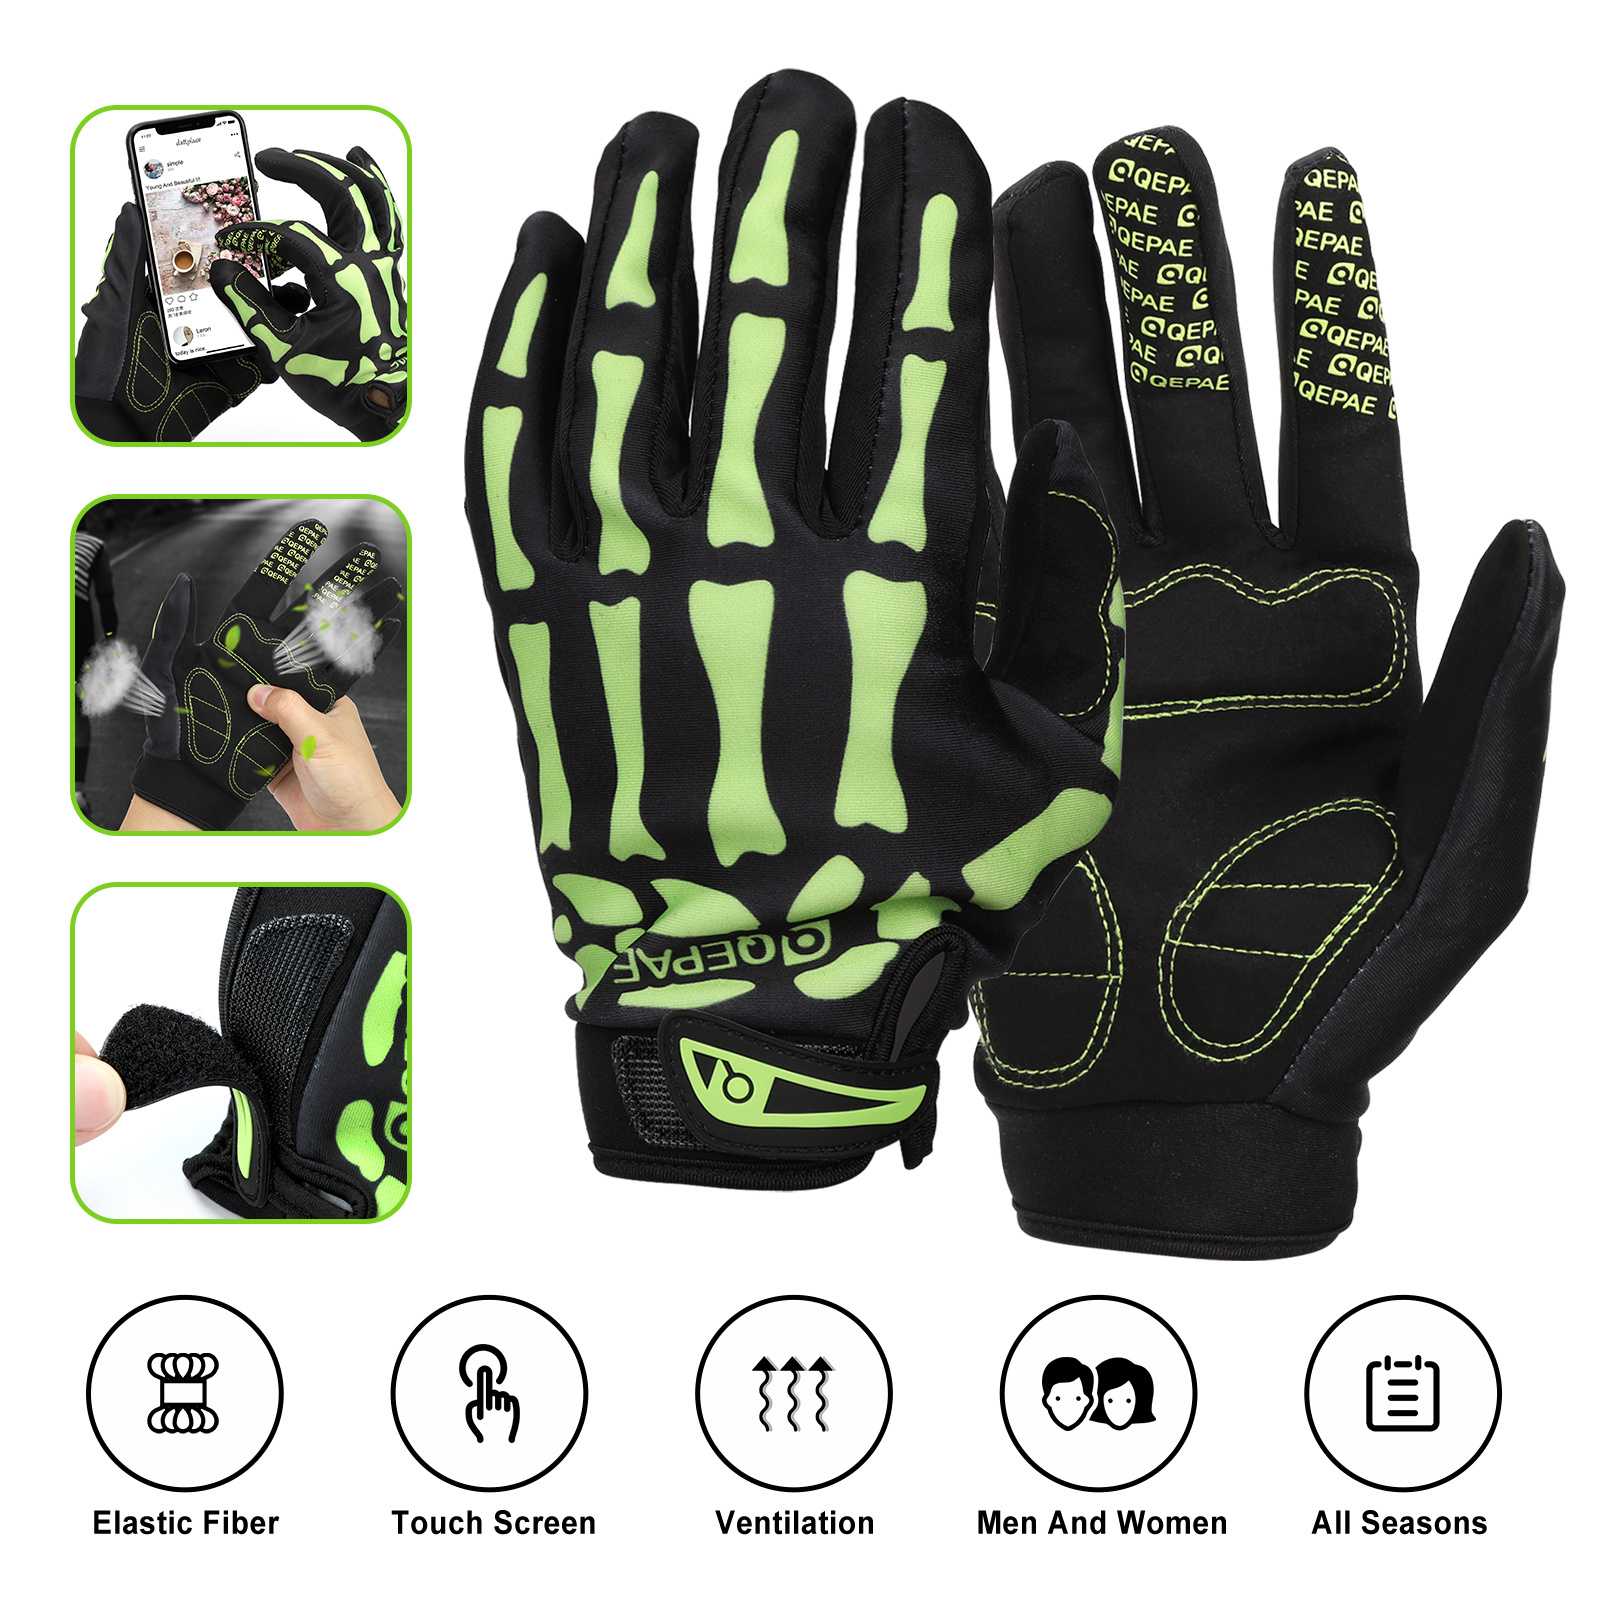 Details about  / Full Finger Motorcycle Winter Gloves Touch Screen Adjustable Elastic Sport Glove